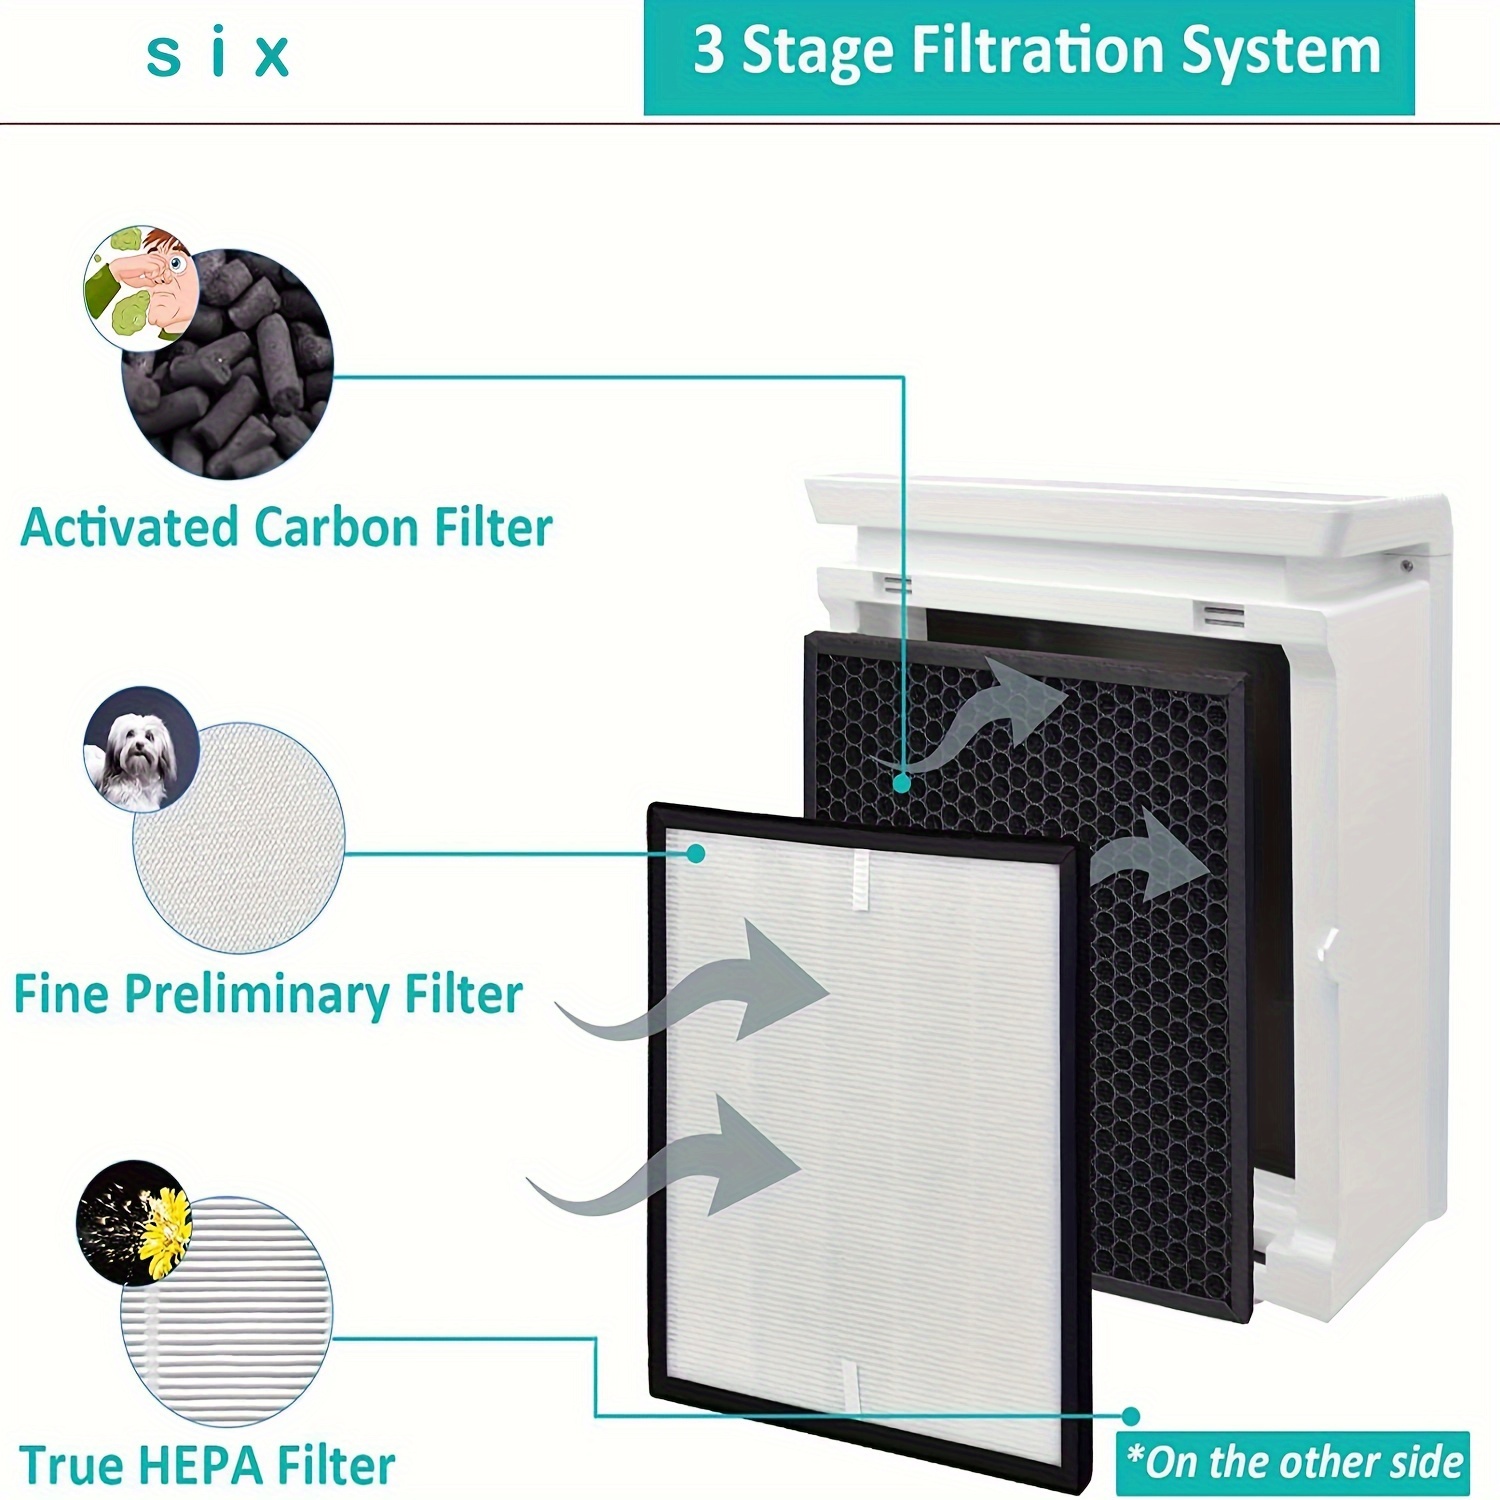  LV-PUR131 Filter Replacement, H13 True HEPA Filter for